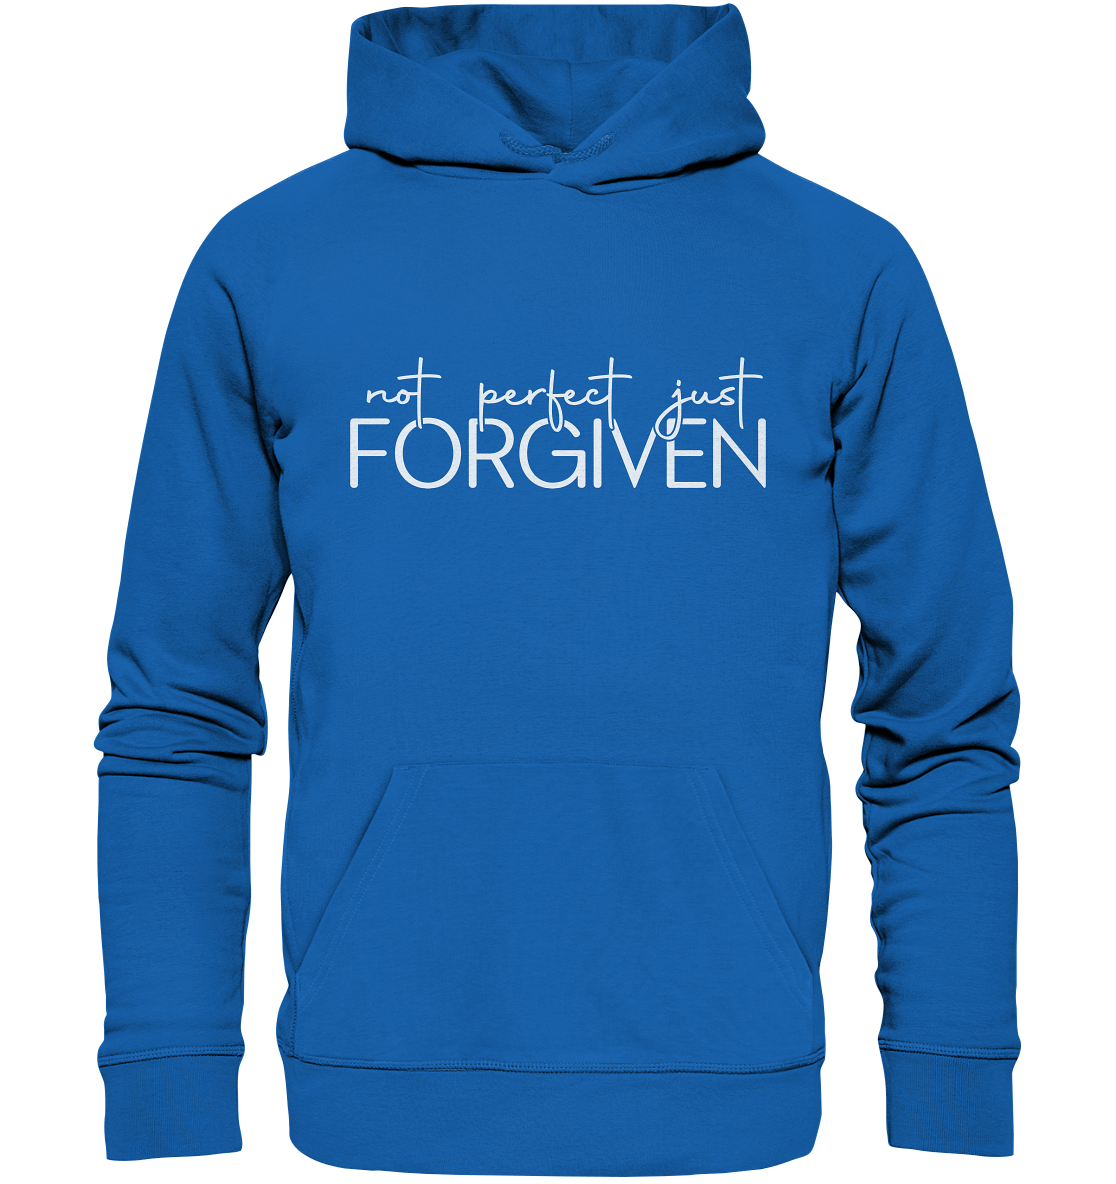 Not Perfect, Just Forgiven - Premium Unisex Hoodie